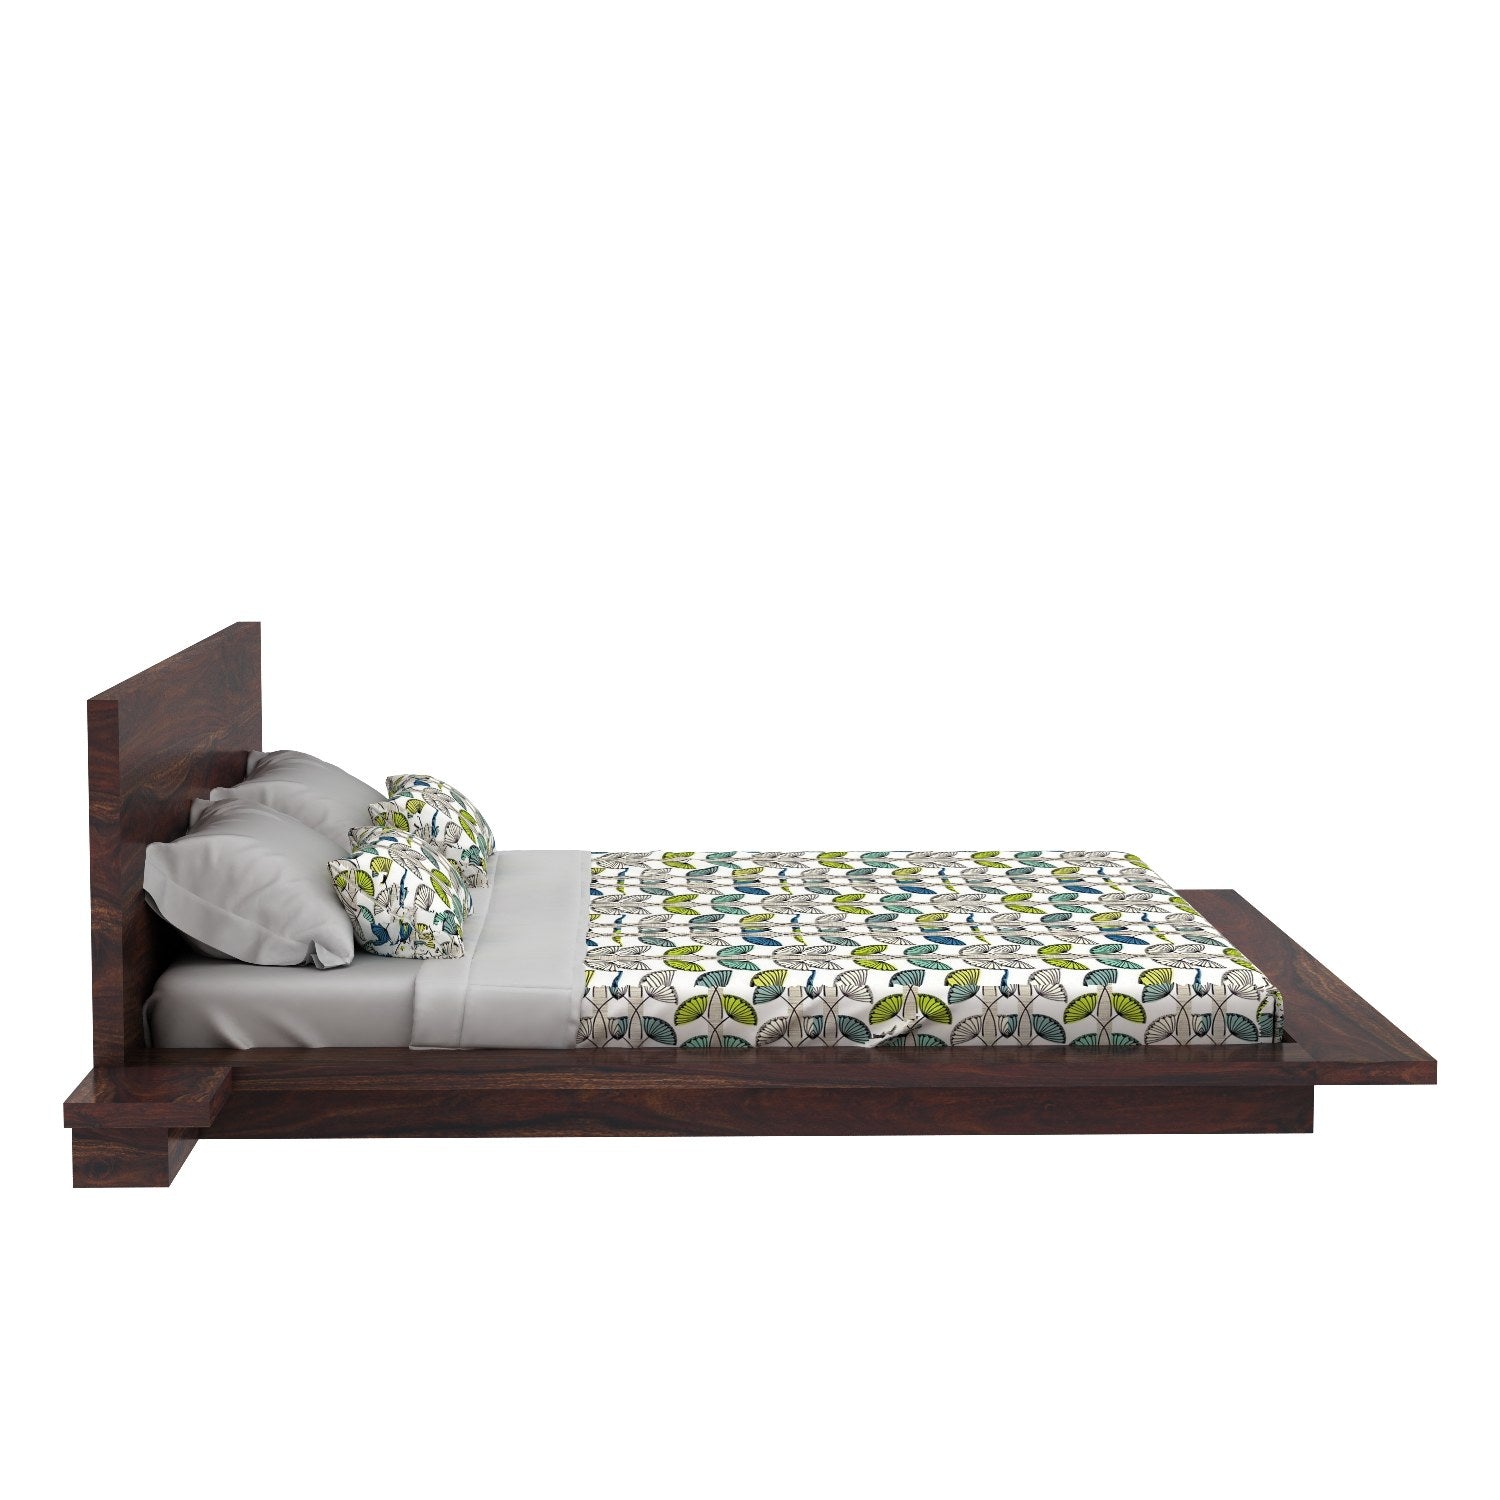 Woodora Solid Sheesham Wood Bed With Bedside Tables (King Size, Walnut Finish)